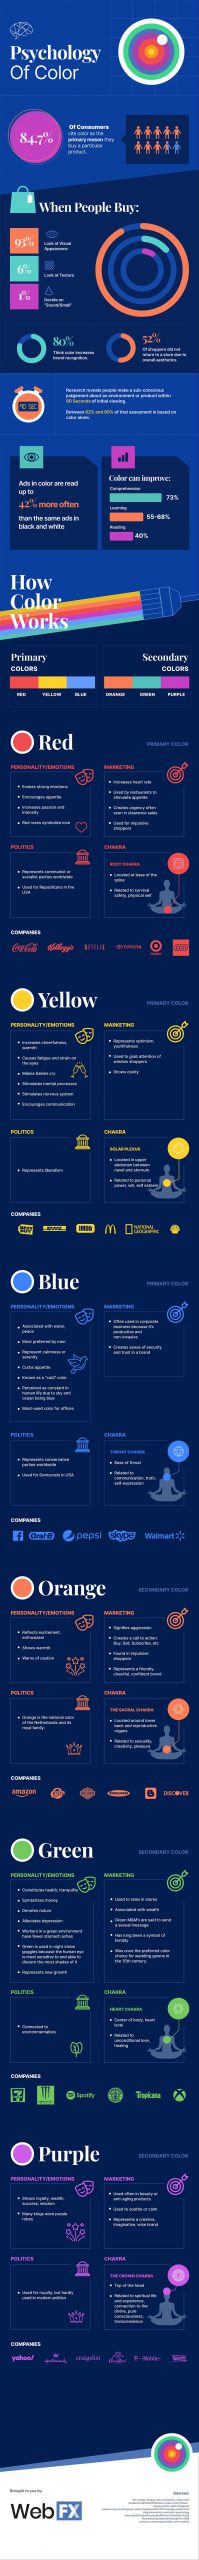 color psychology in web design how to choose the best color scheme for your website infographic scaled 1